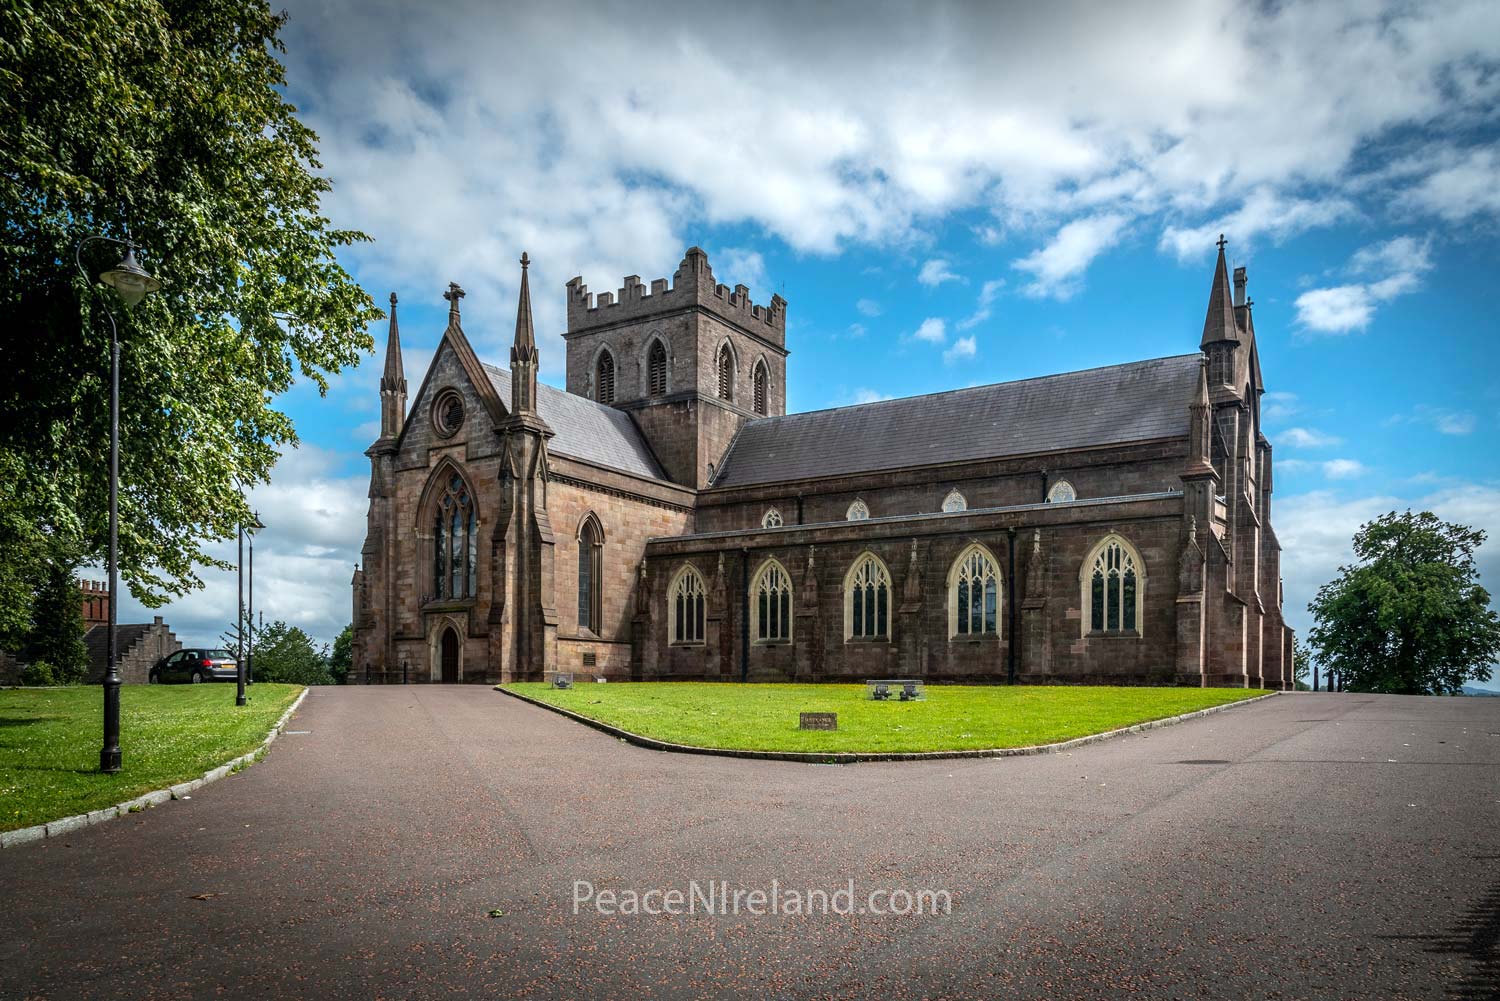 The second St Patrick's Cathedral, Armagh